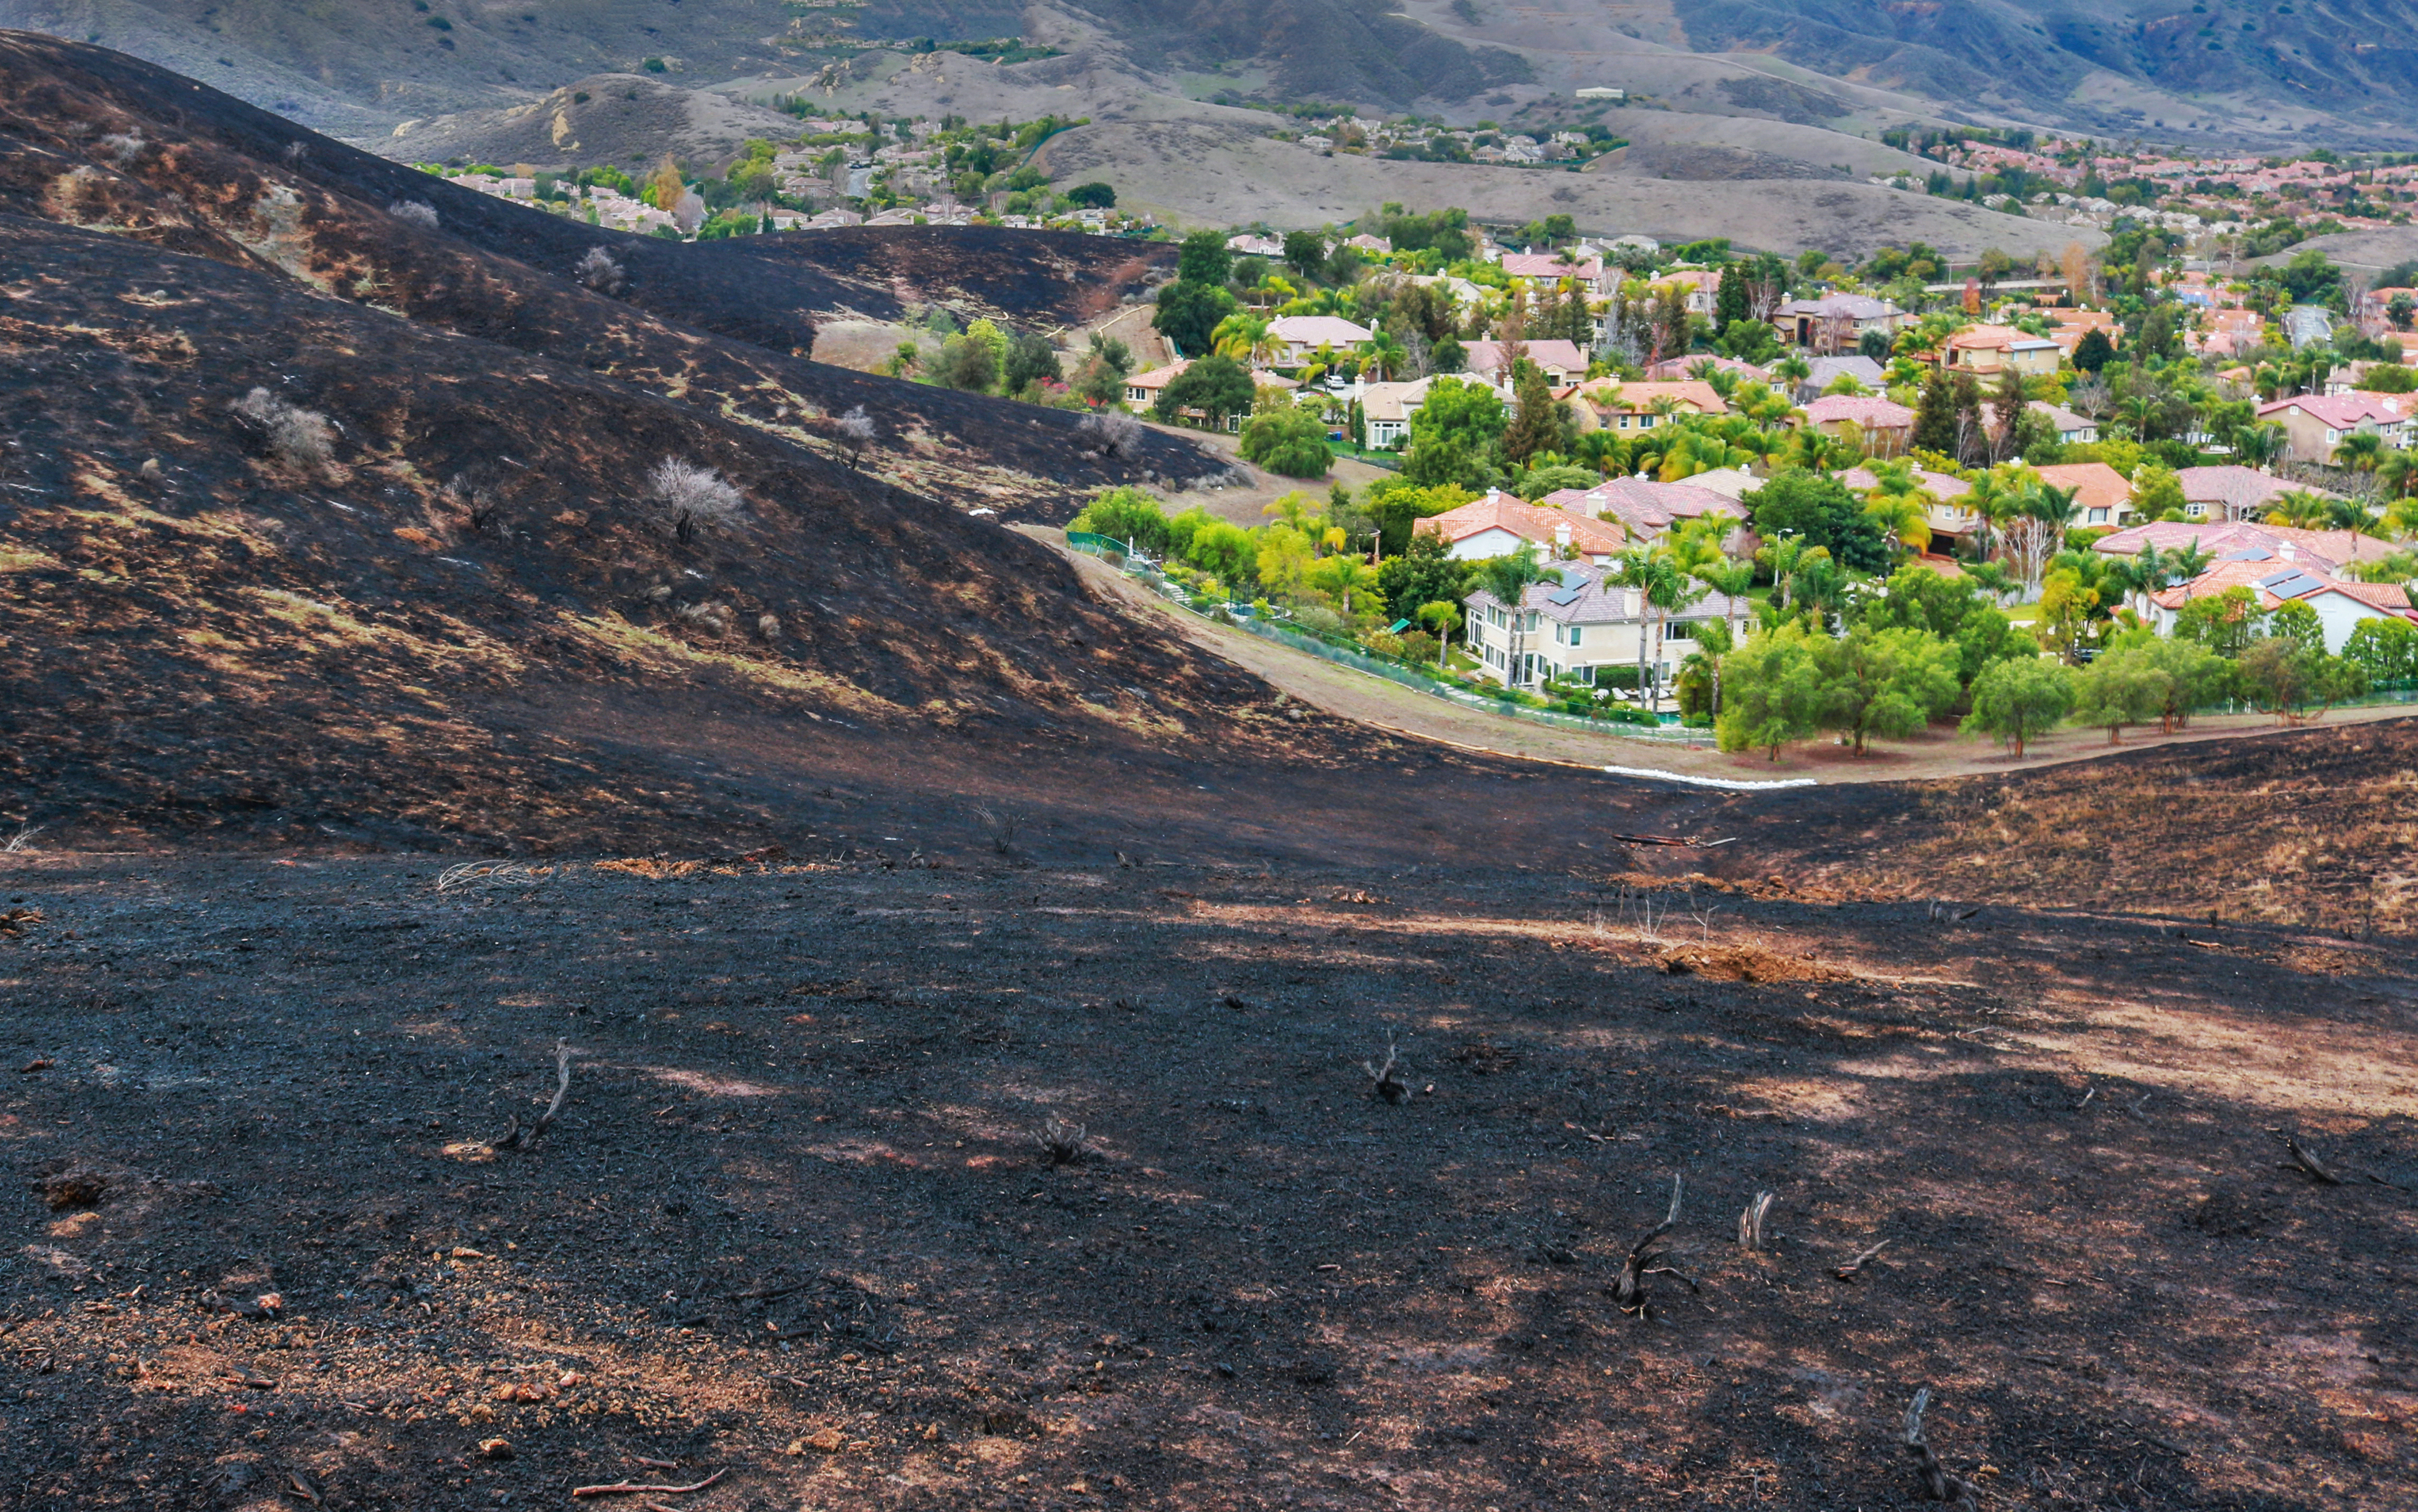 Rethinking Wildfire Danger in New Development Projects